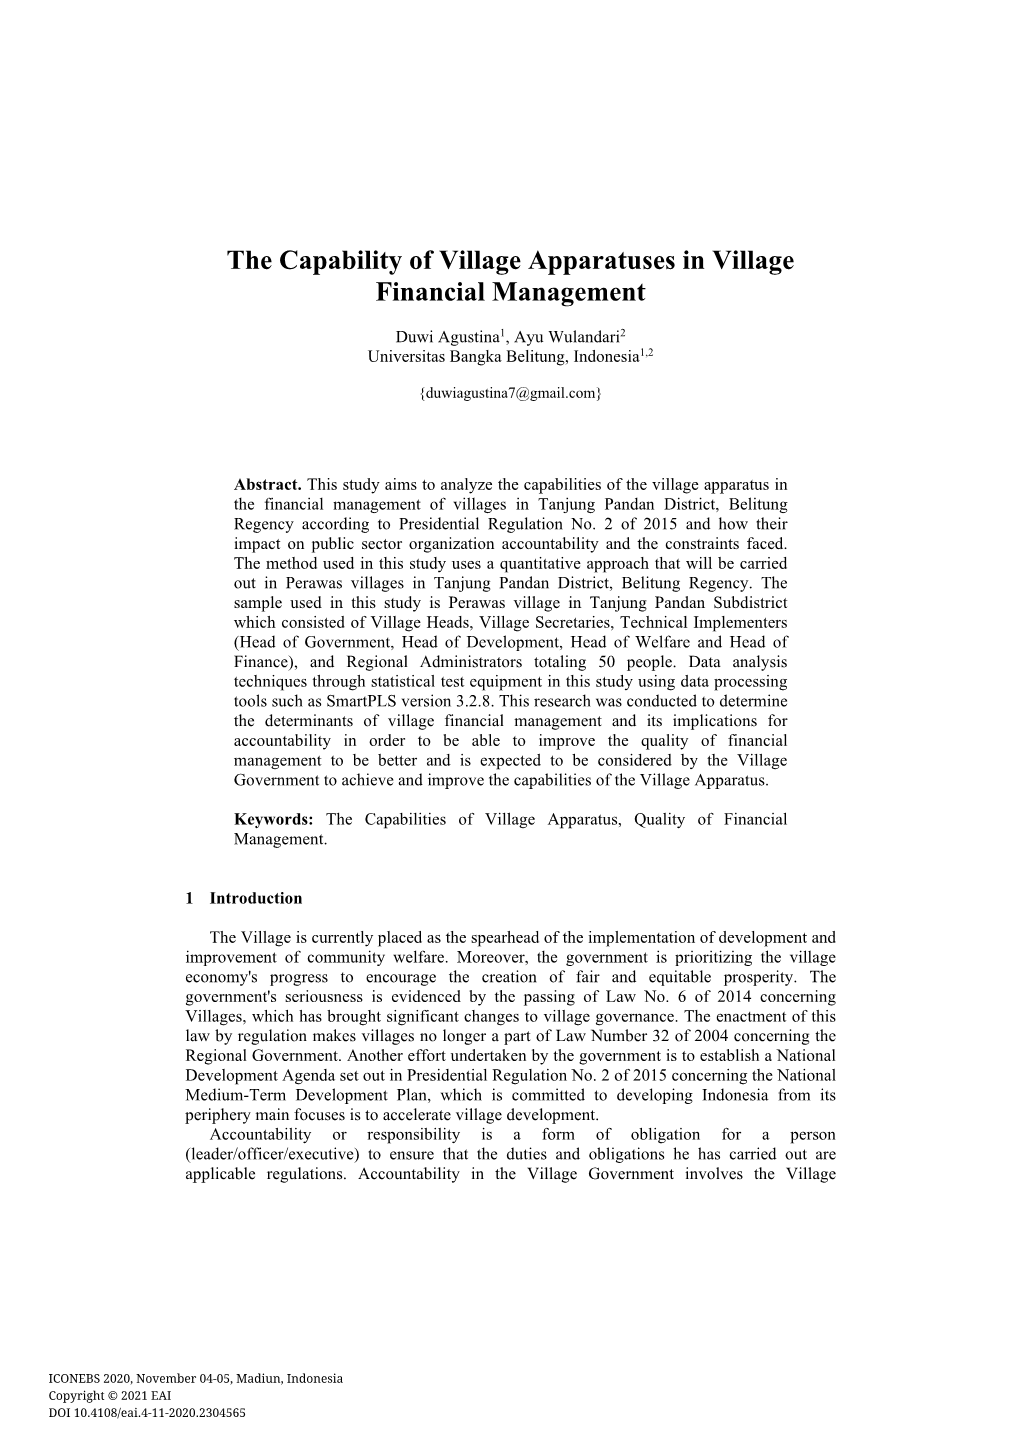 The Capability of Village Apparatuses in Village Financial Management